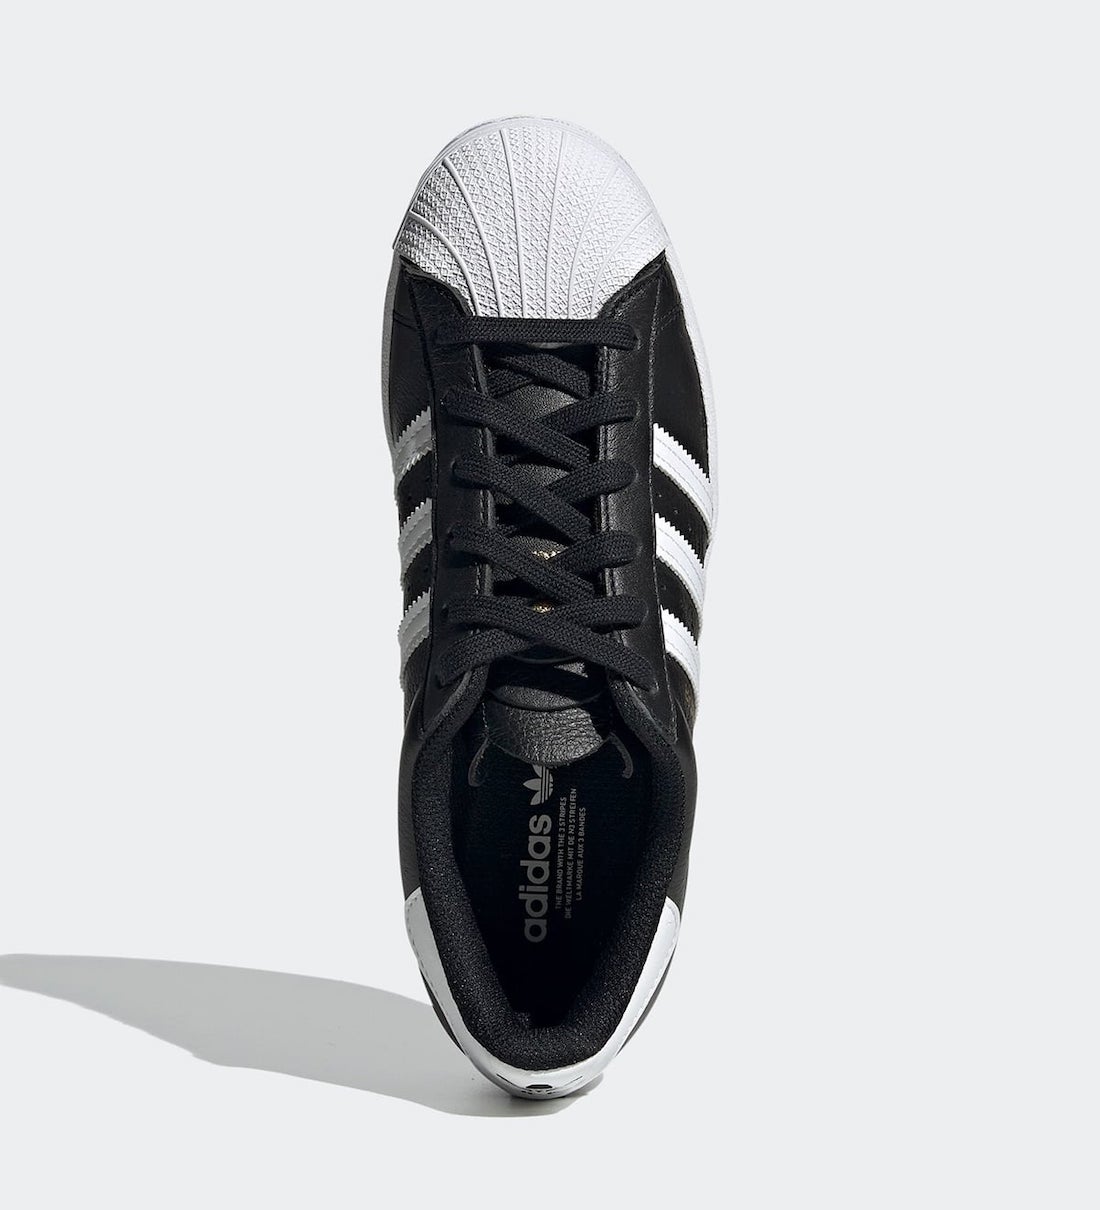 adidas Superstar Triple Tongue Black H03905 Release Date